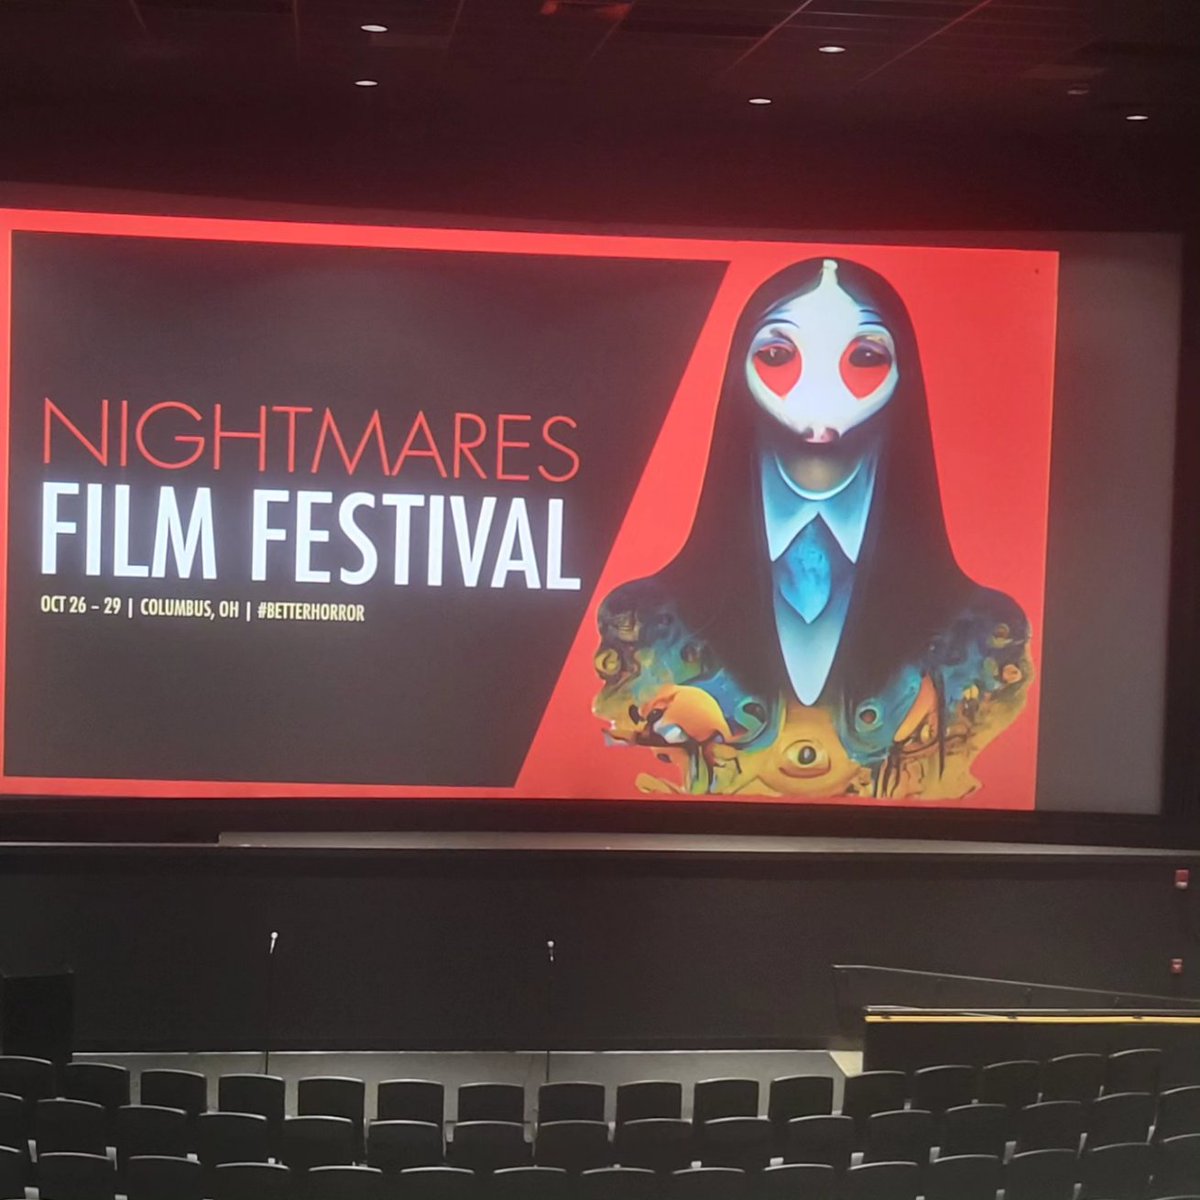 So excited to meet @stewartsparke, Lyndsey Craine, and Cal O'Connell at @NightmaresFest. @htkmonsters was a hilarious, bloody fun movie.